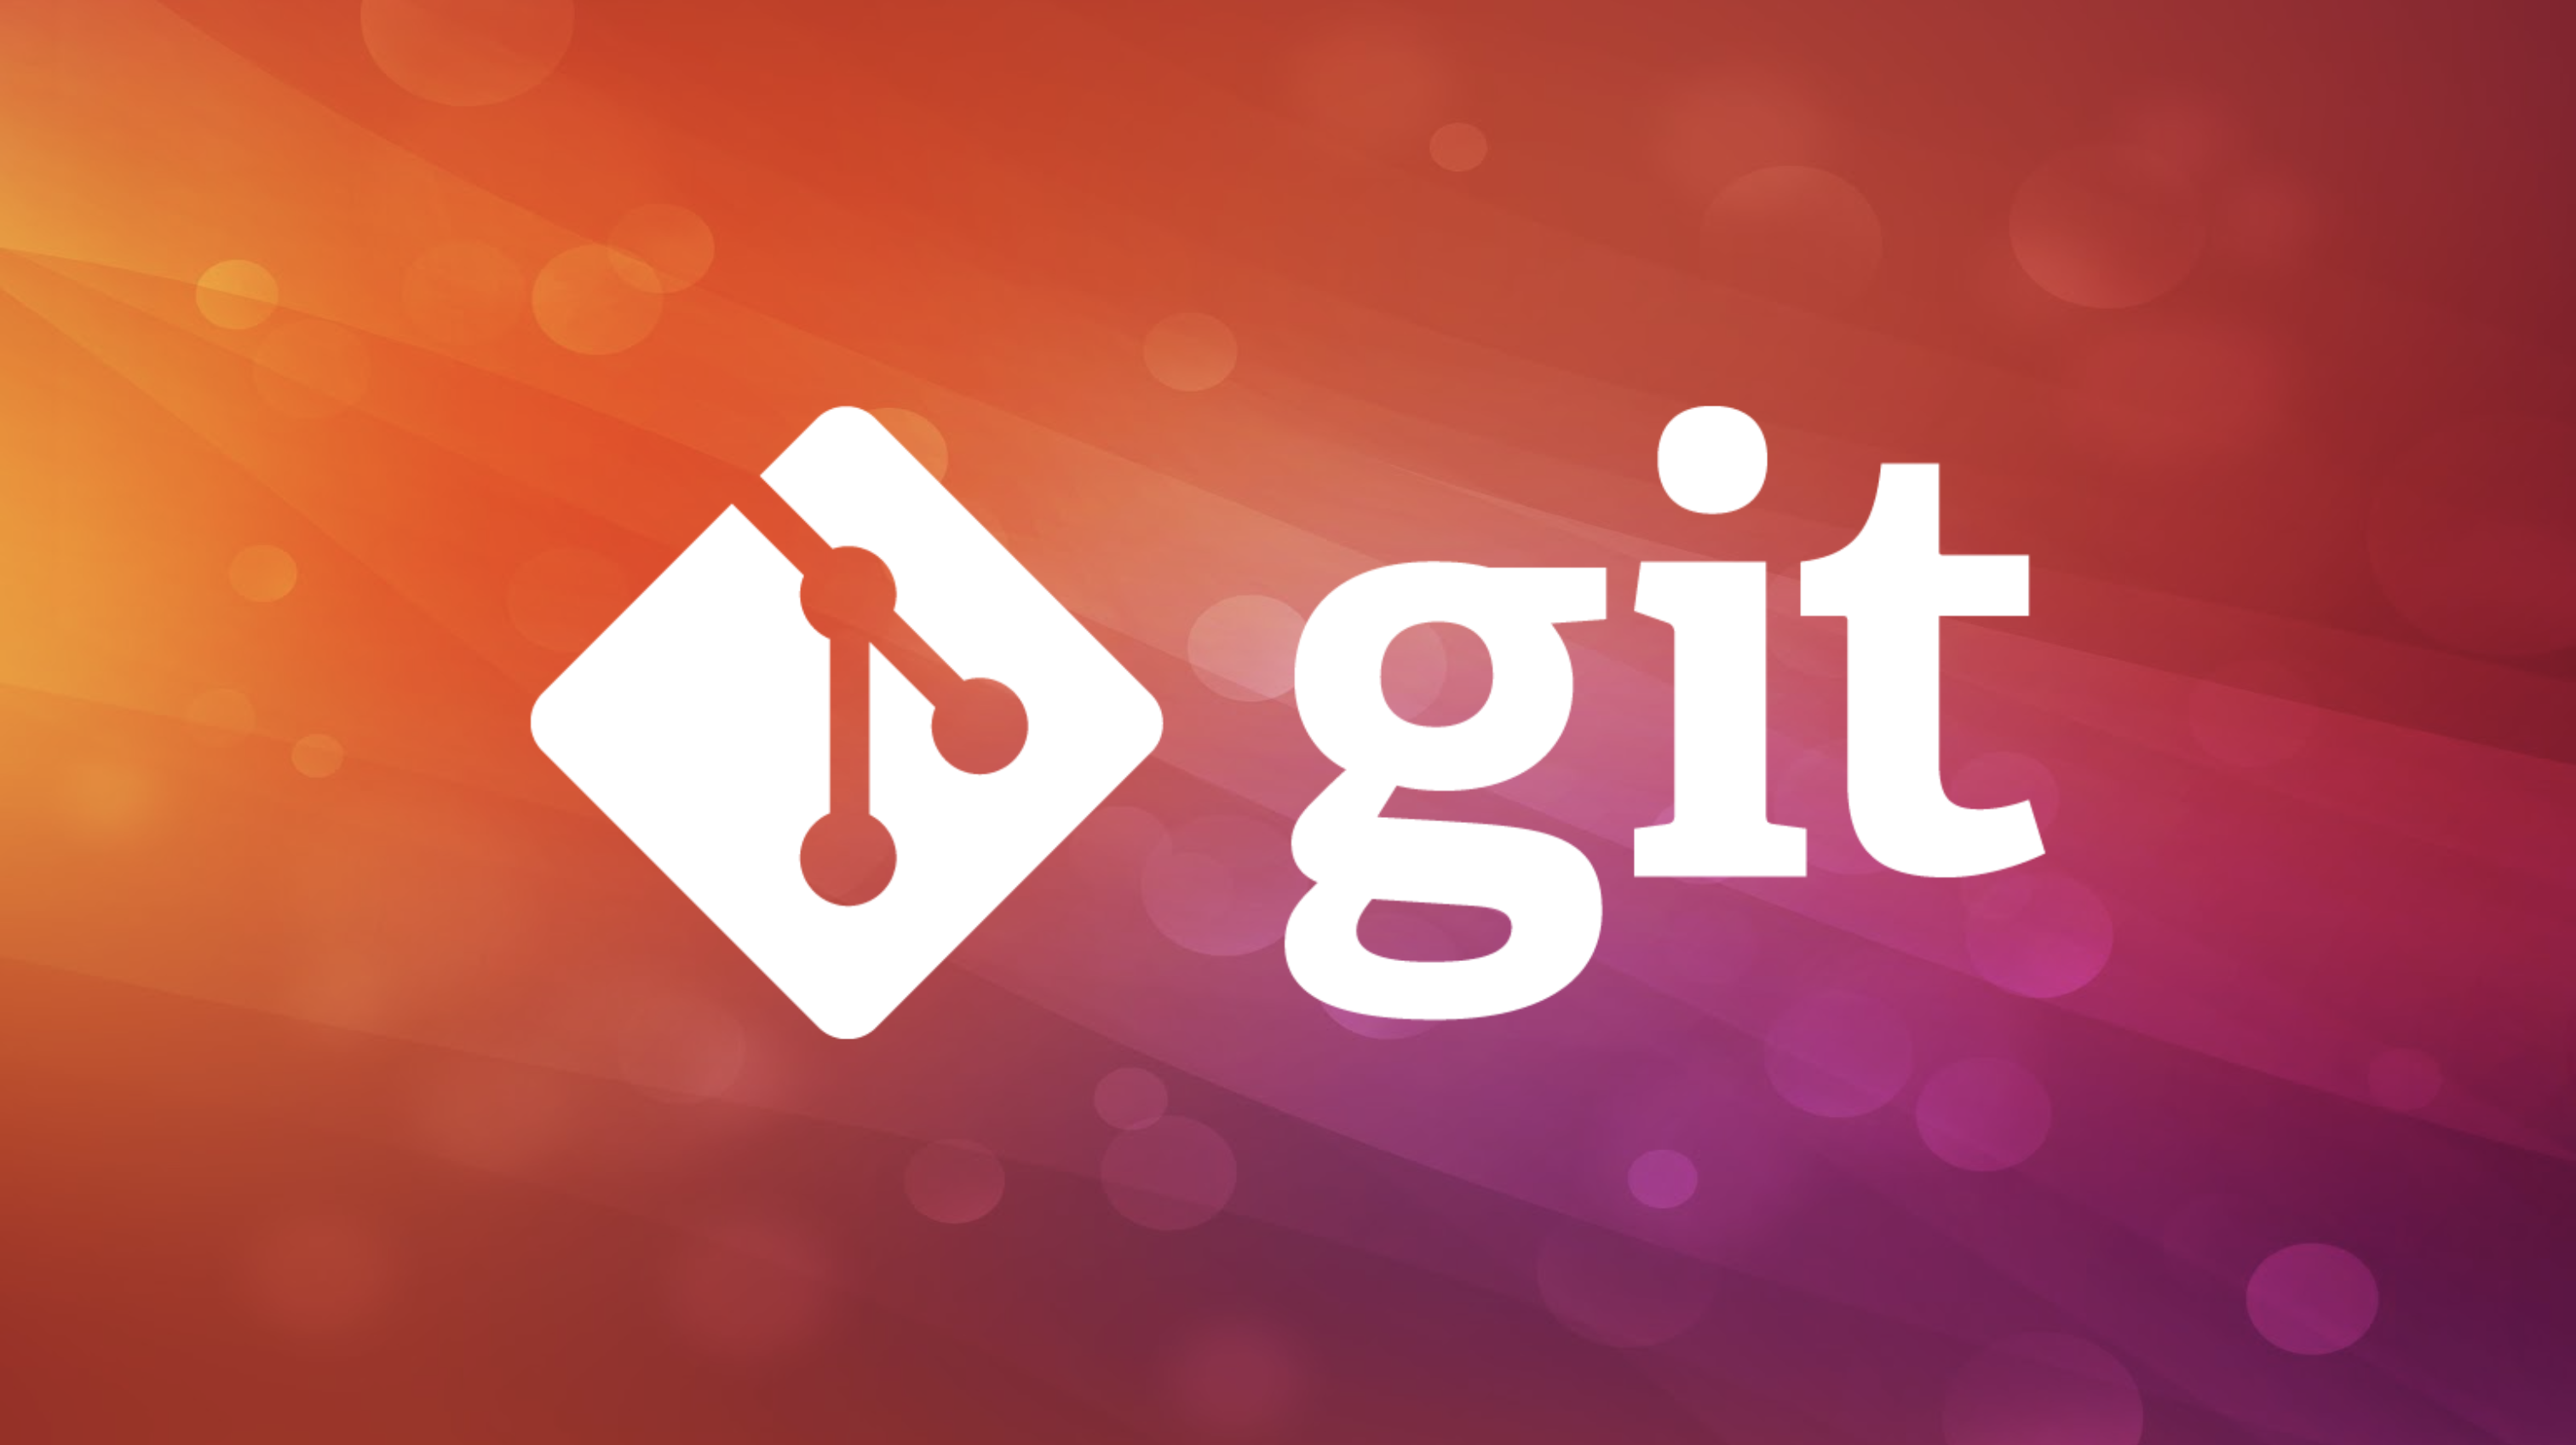 Version Control of Your Scripts with Git